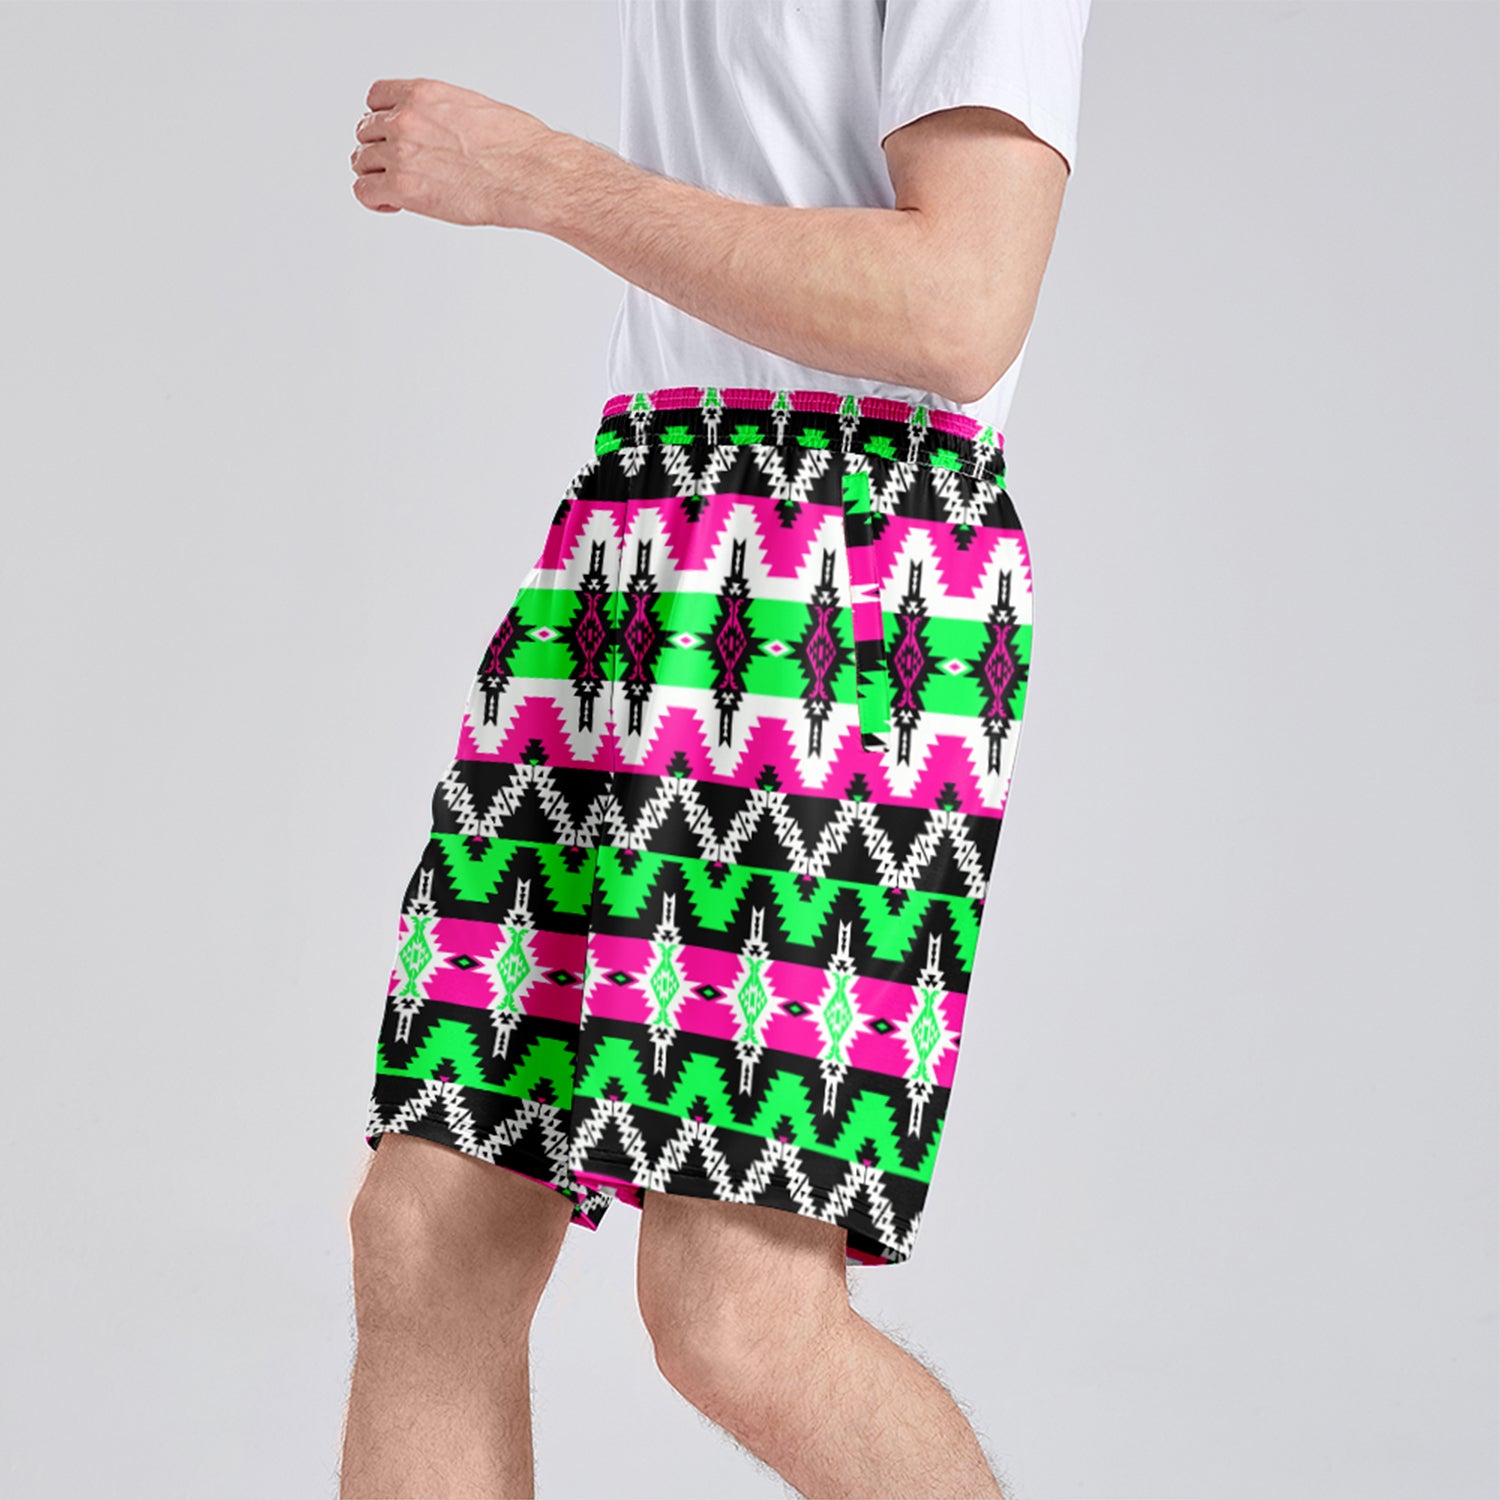 Two Spirit Ceremony Athletic Shorts with Pockets